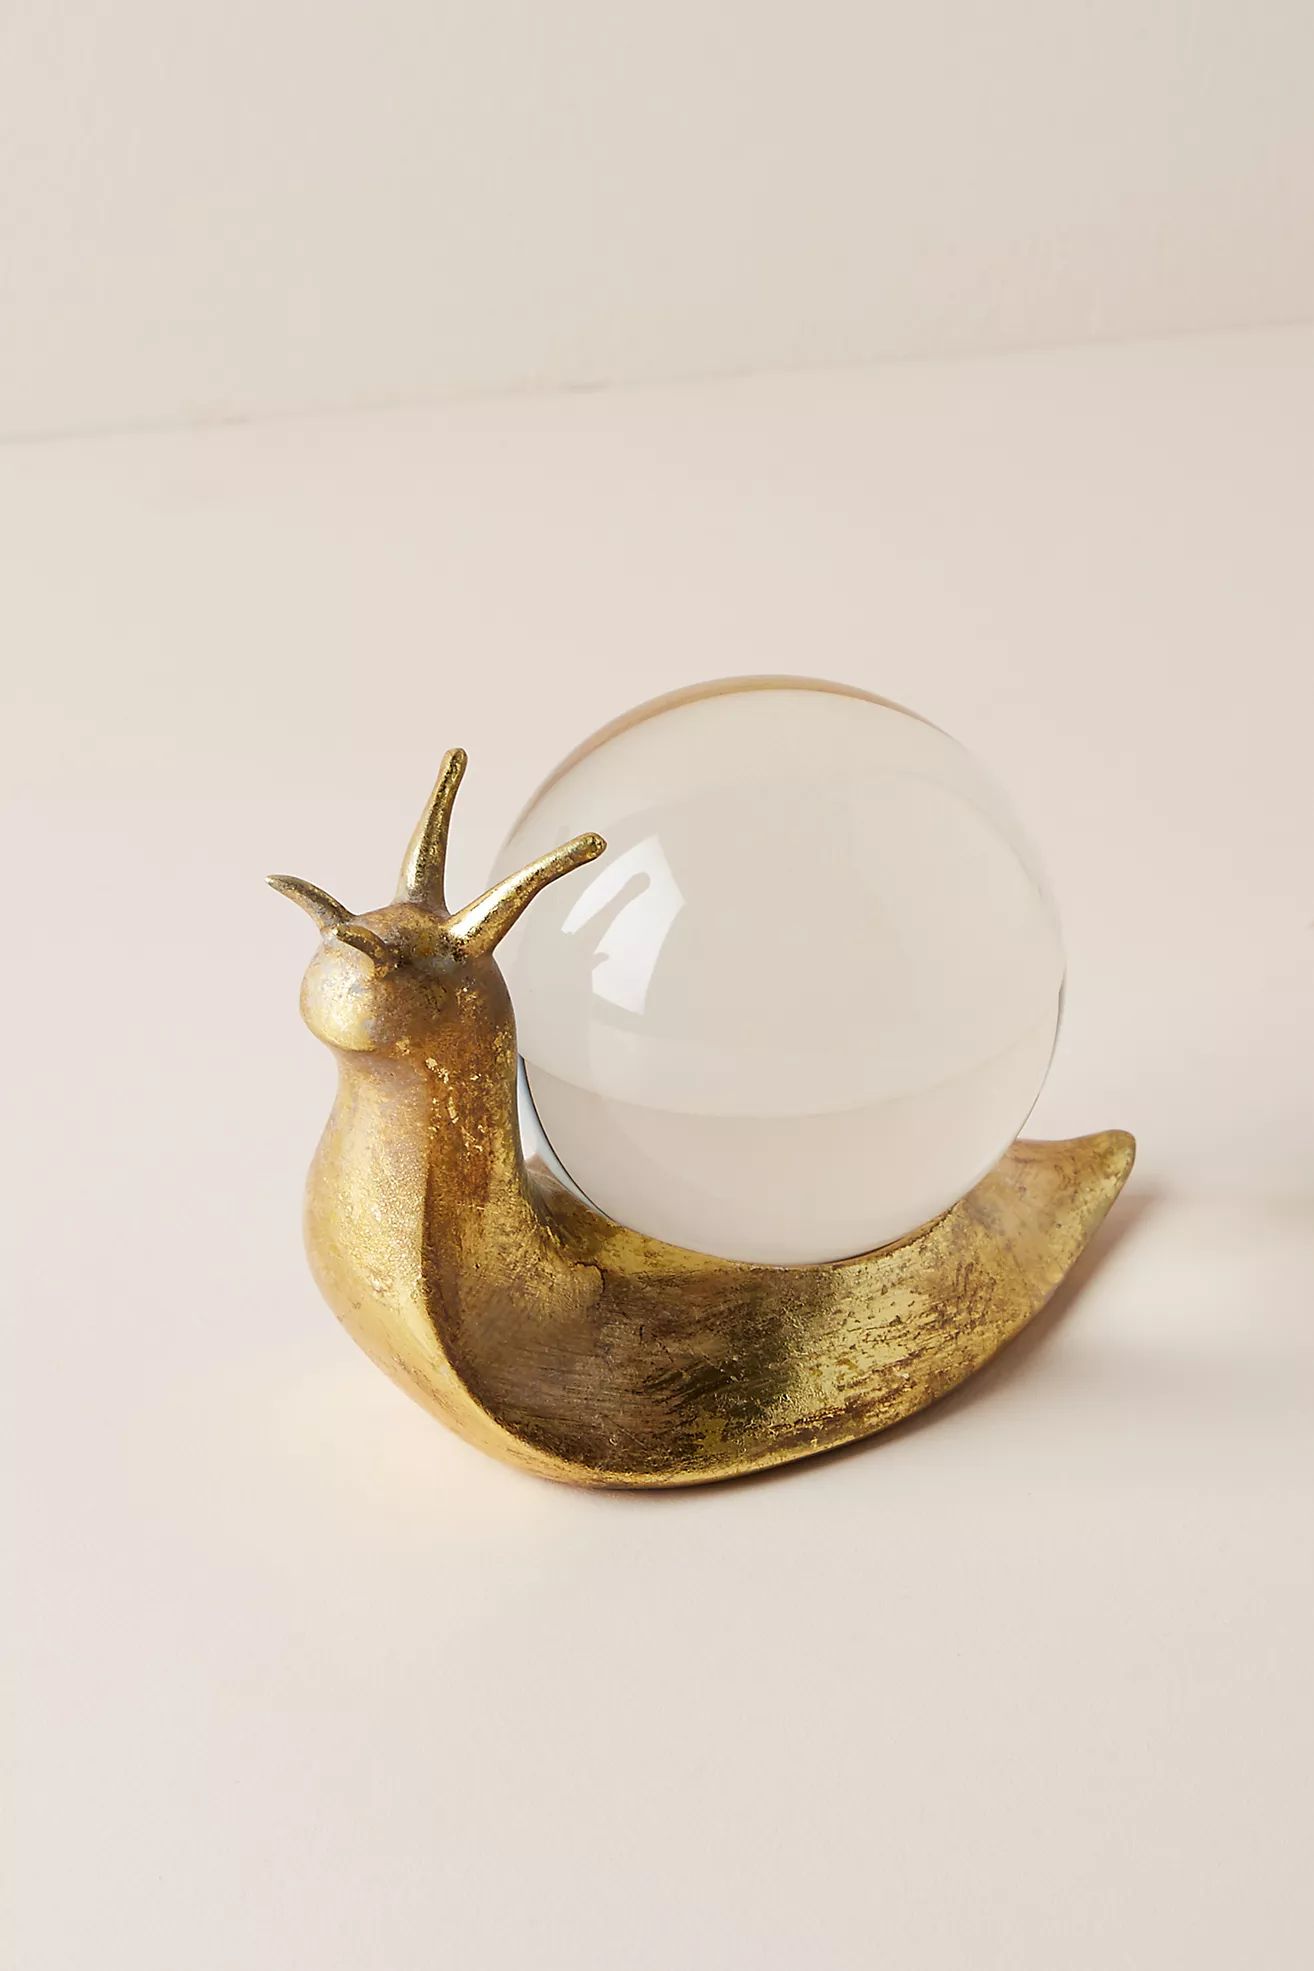 Snail Orb Decorative Object | Anthropologie (US)